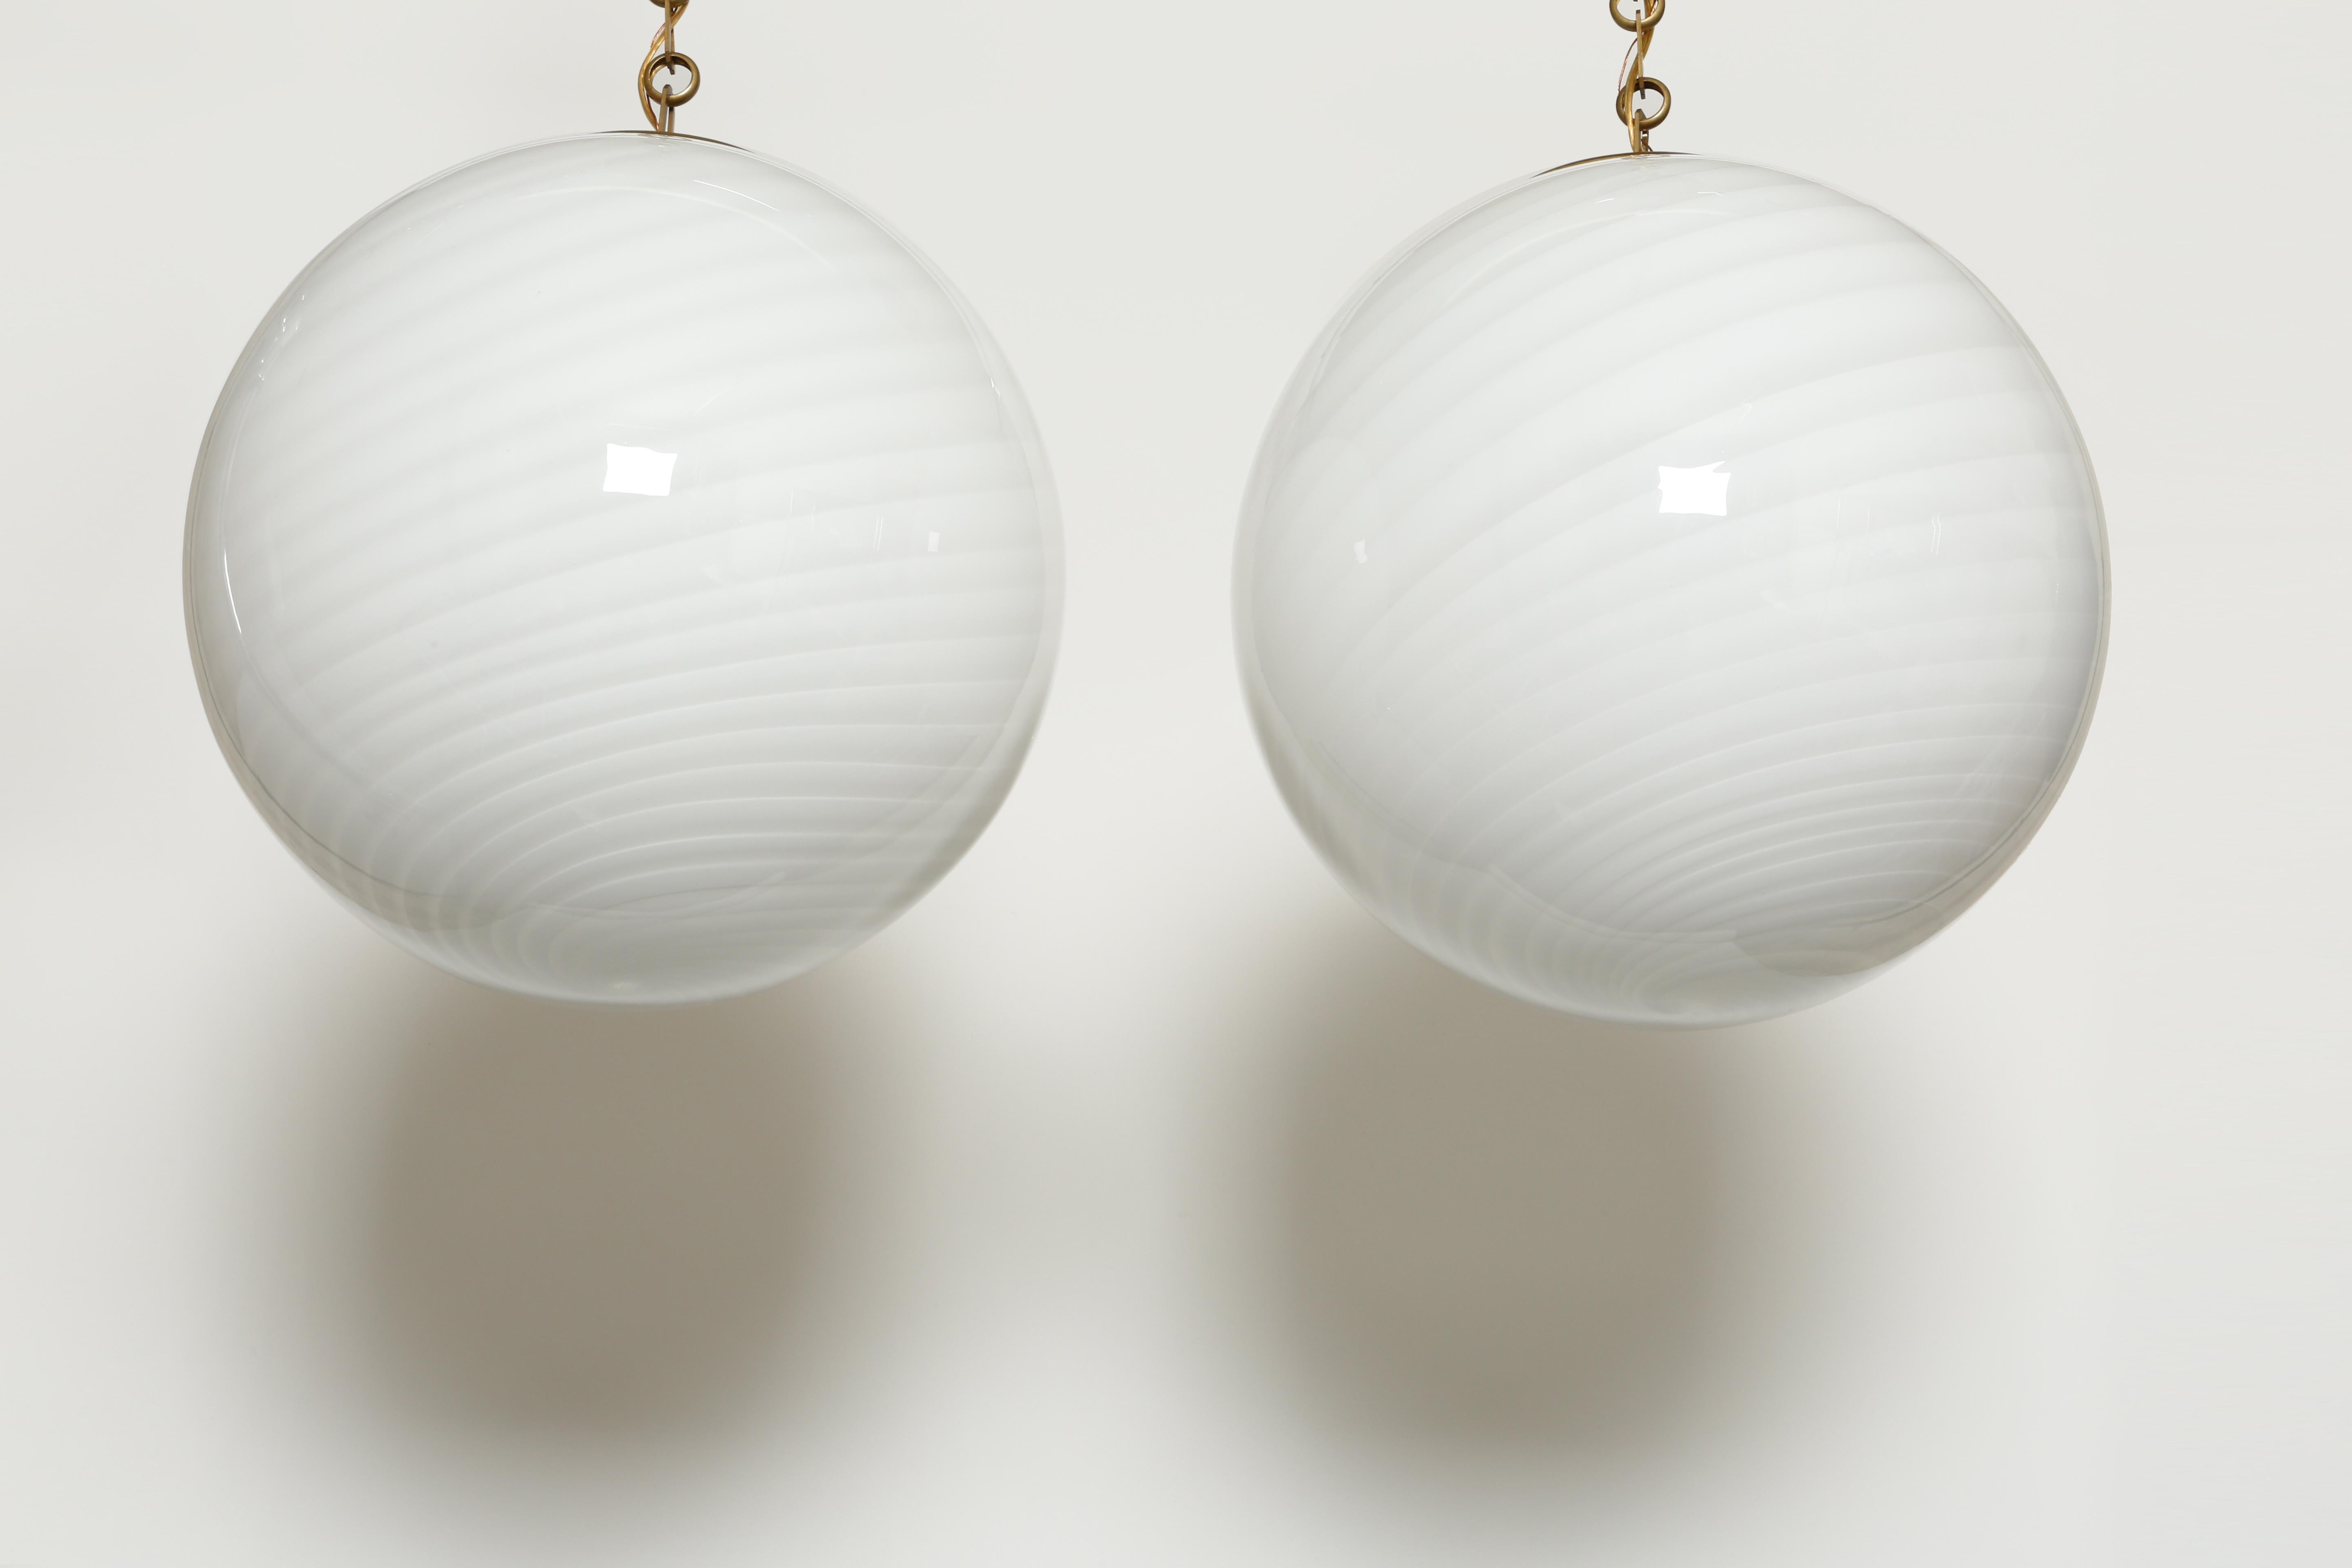 Mid-20th Century Murano Glass Ceiling Pendants, a Pair